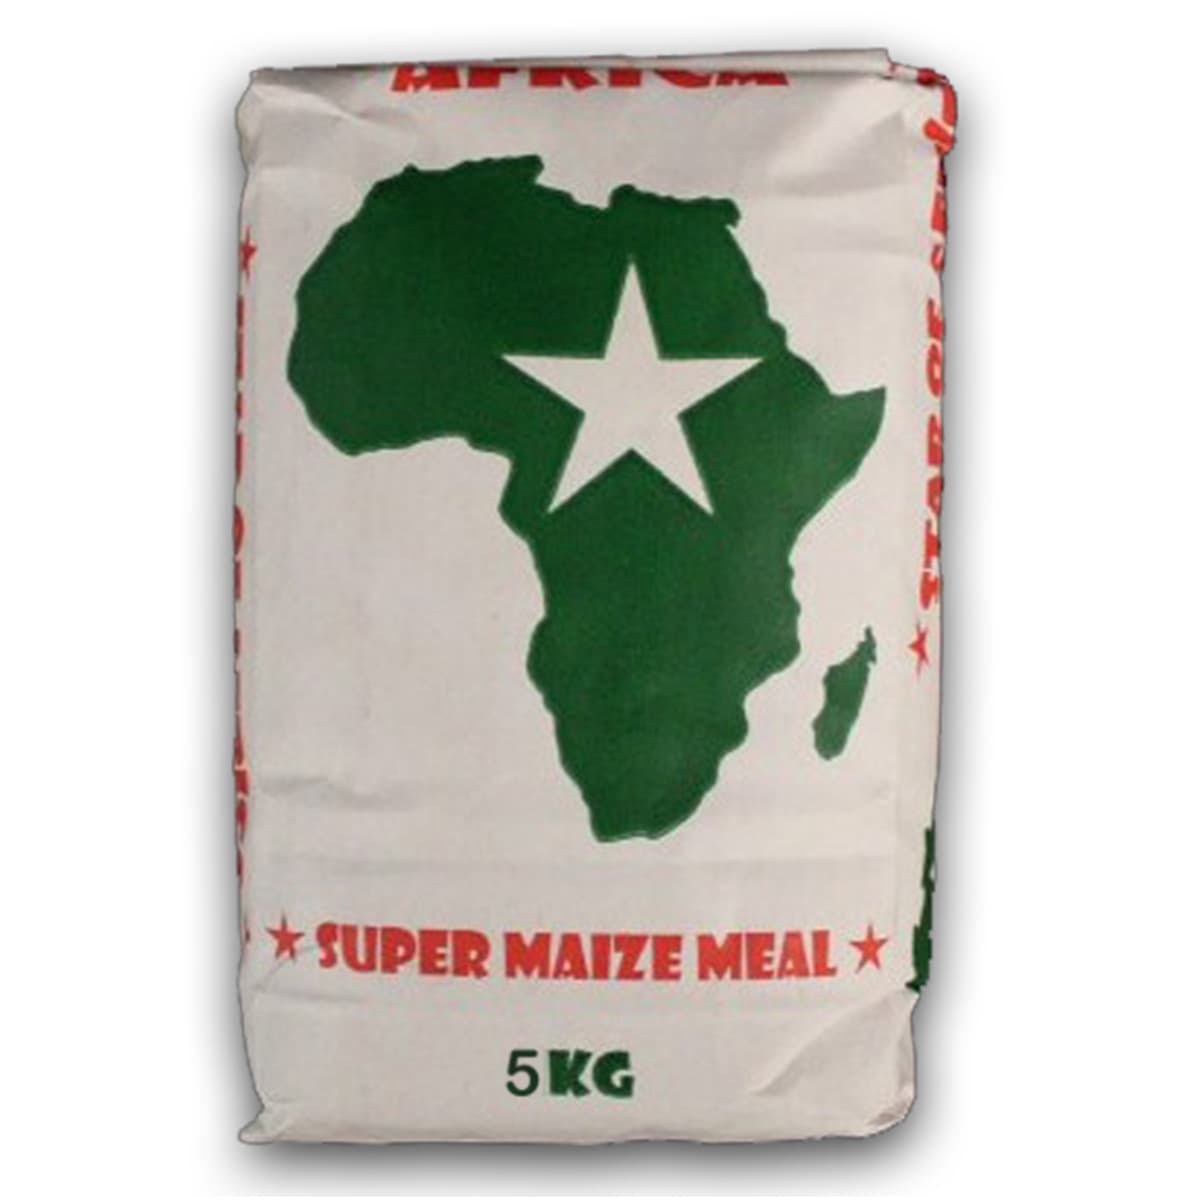 Buy Star of Africa Super Maize Meal - 5 kg